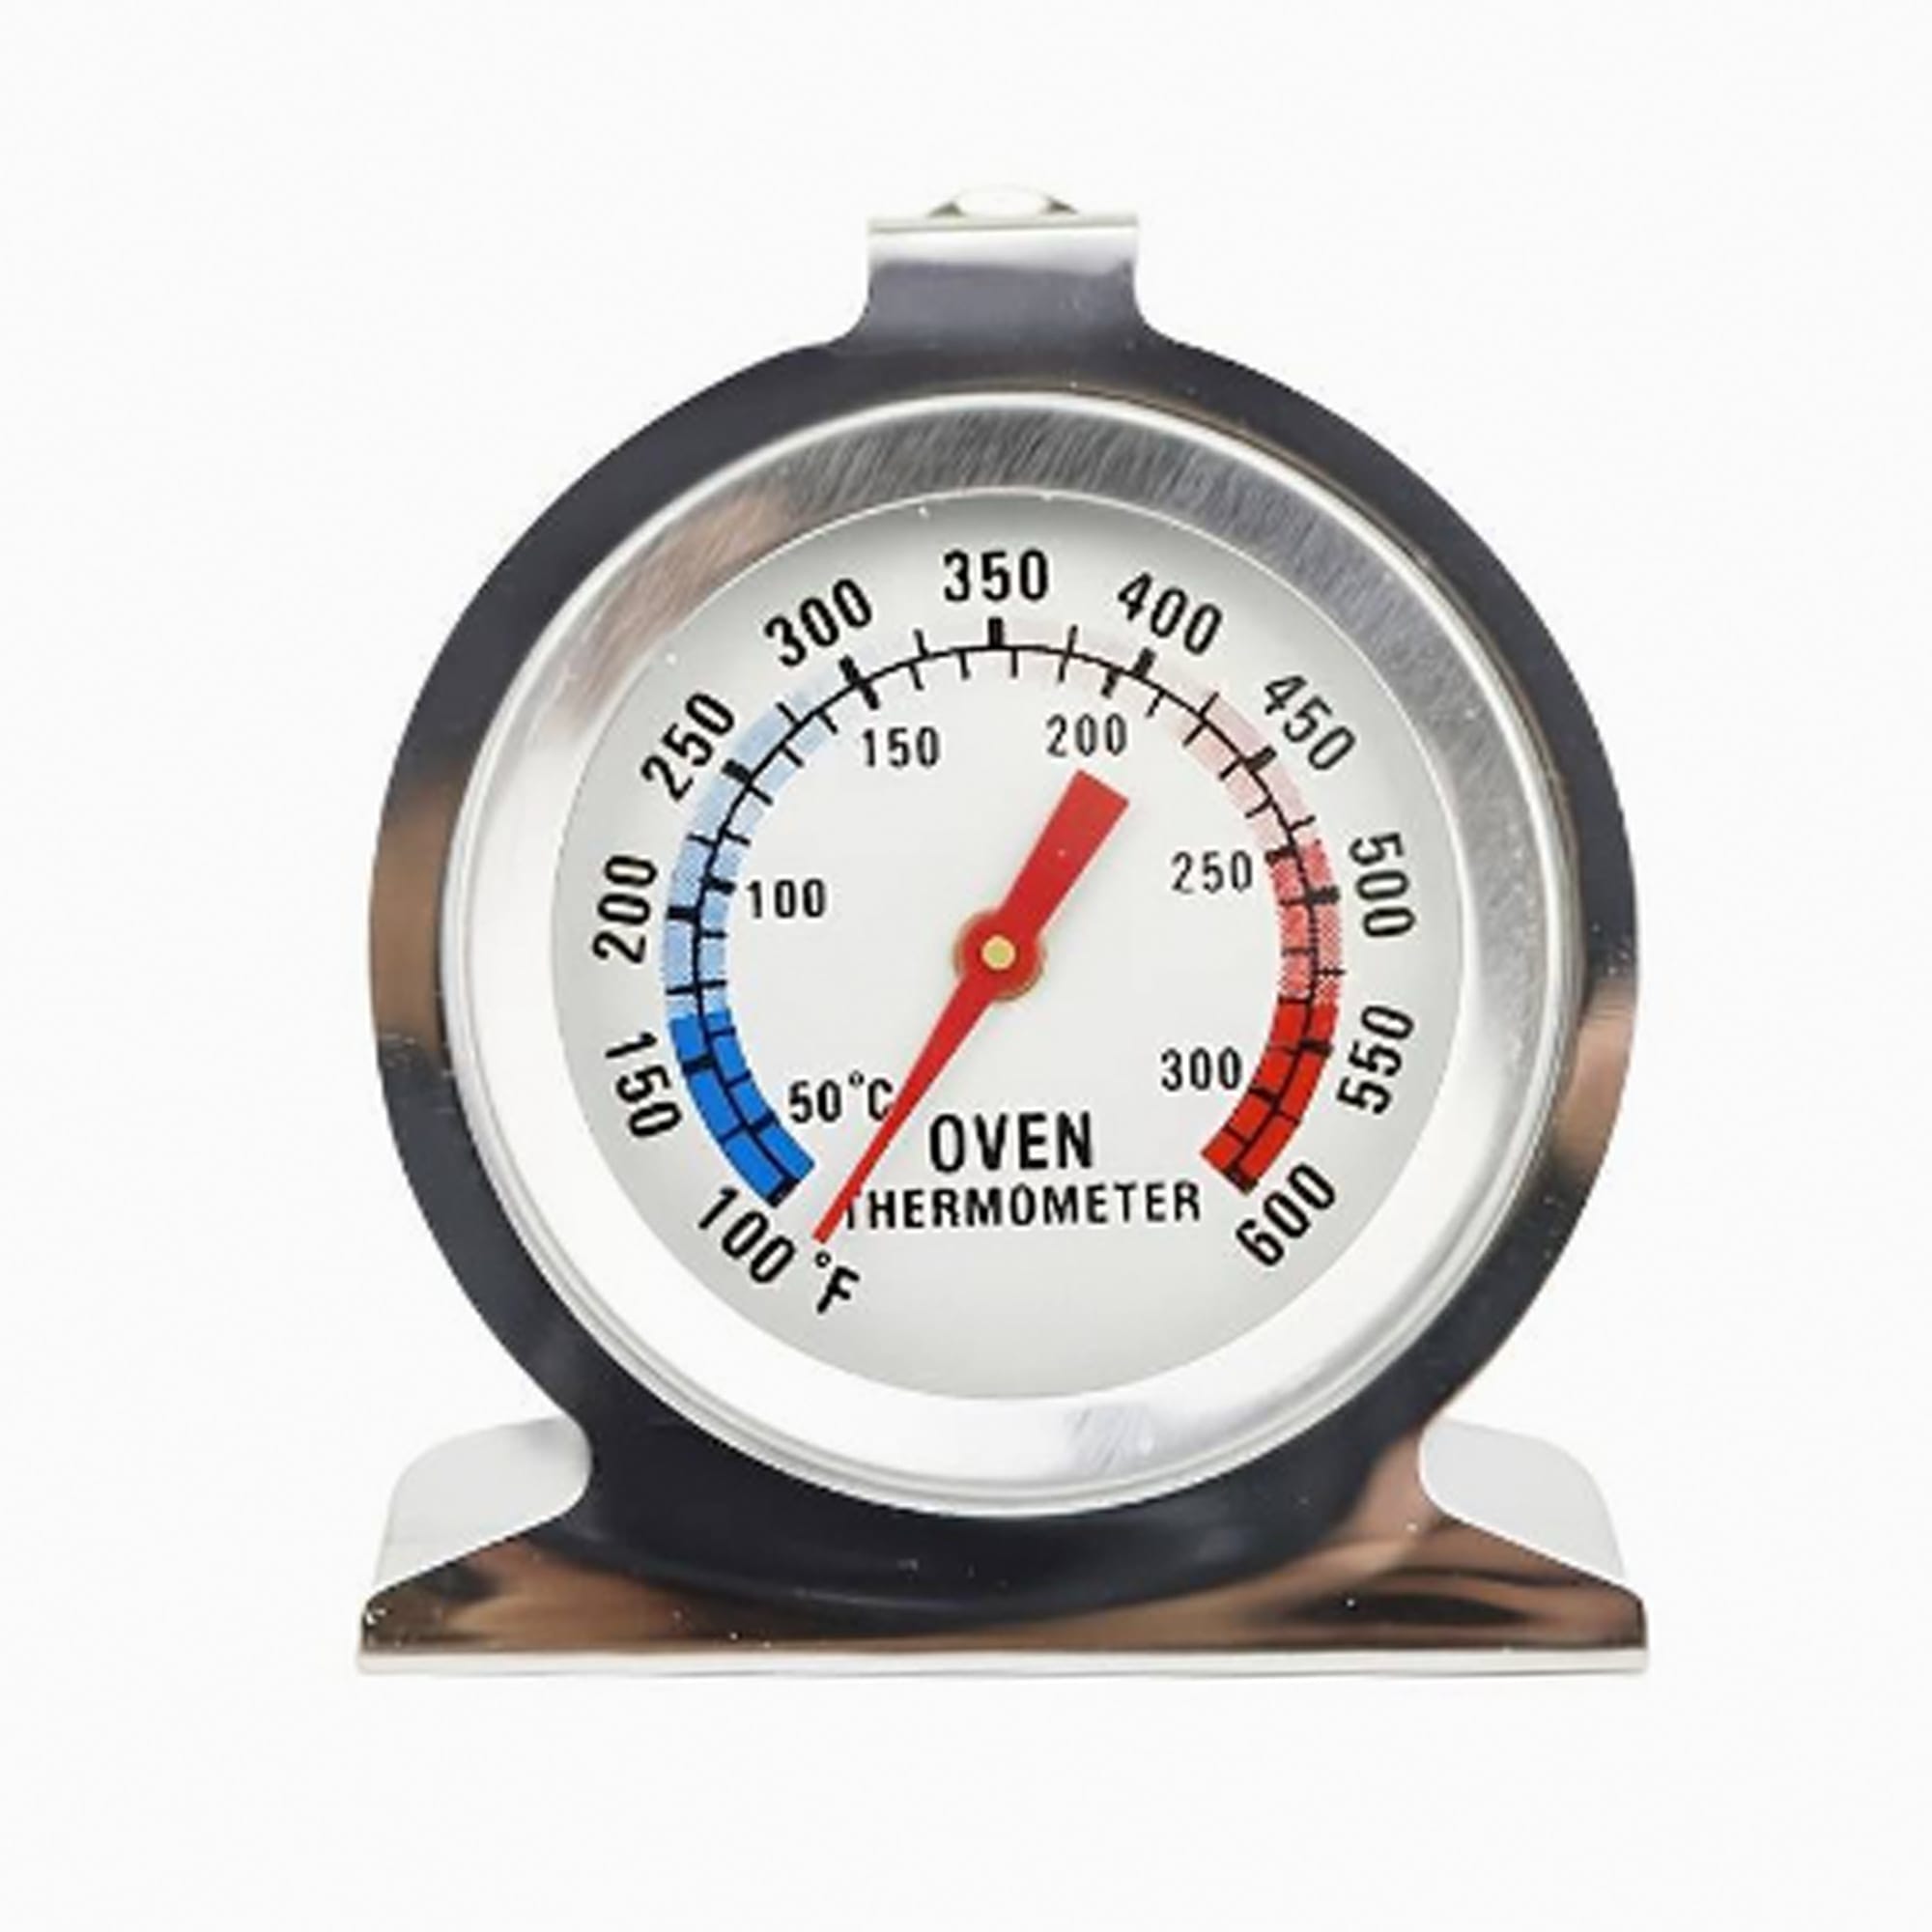 Home Basics Oven Thermometer $3.00 EACH, CASE PACK OF 24